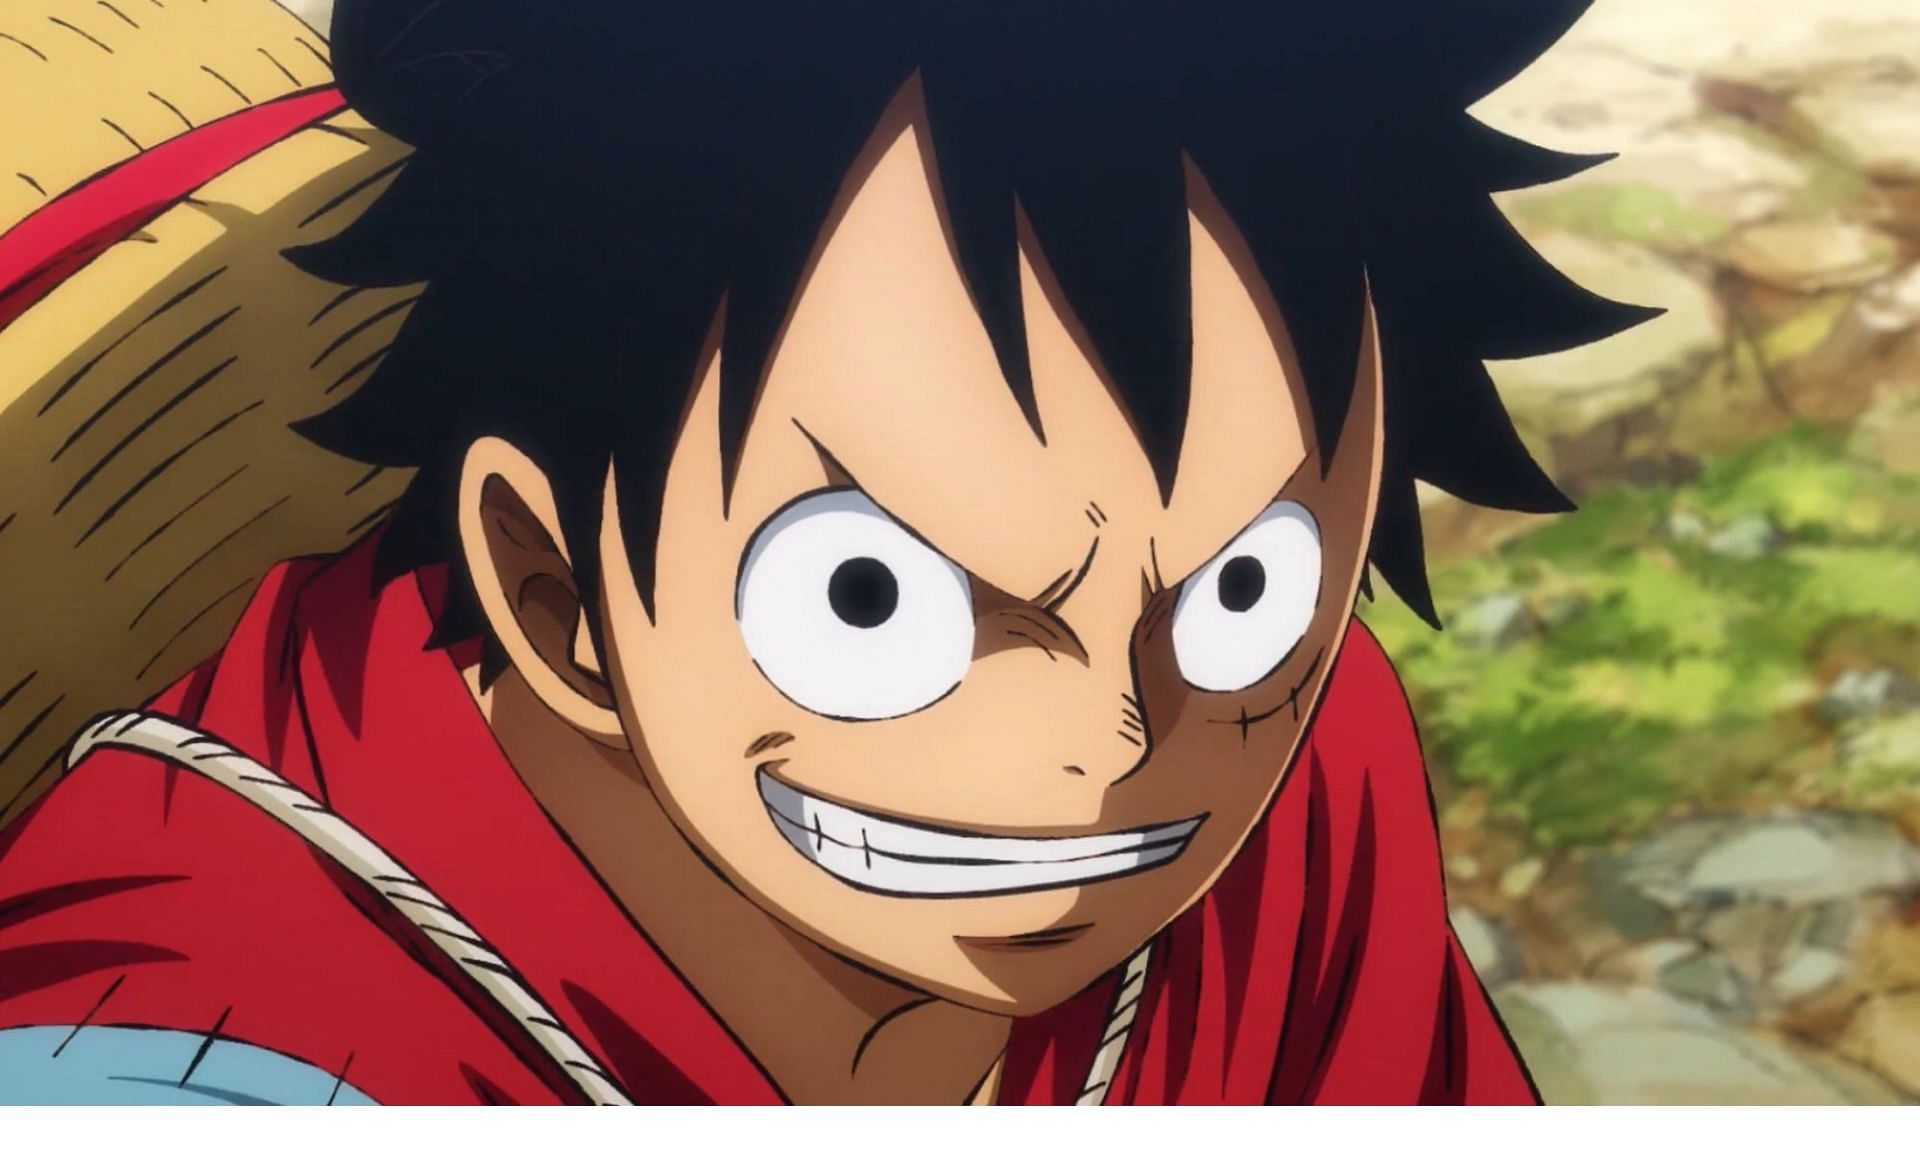 Luffy is known for his adventurous spirit (Image via Toei Animation)